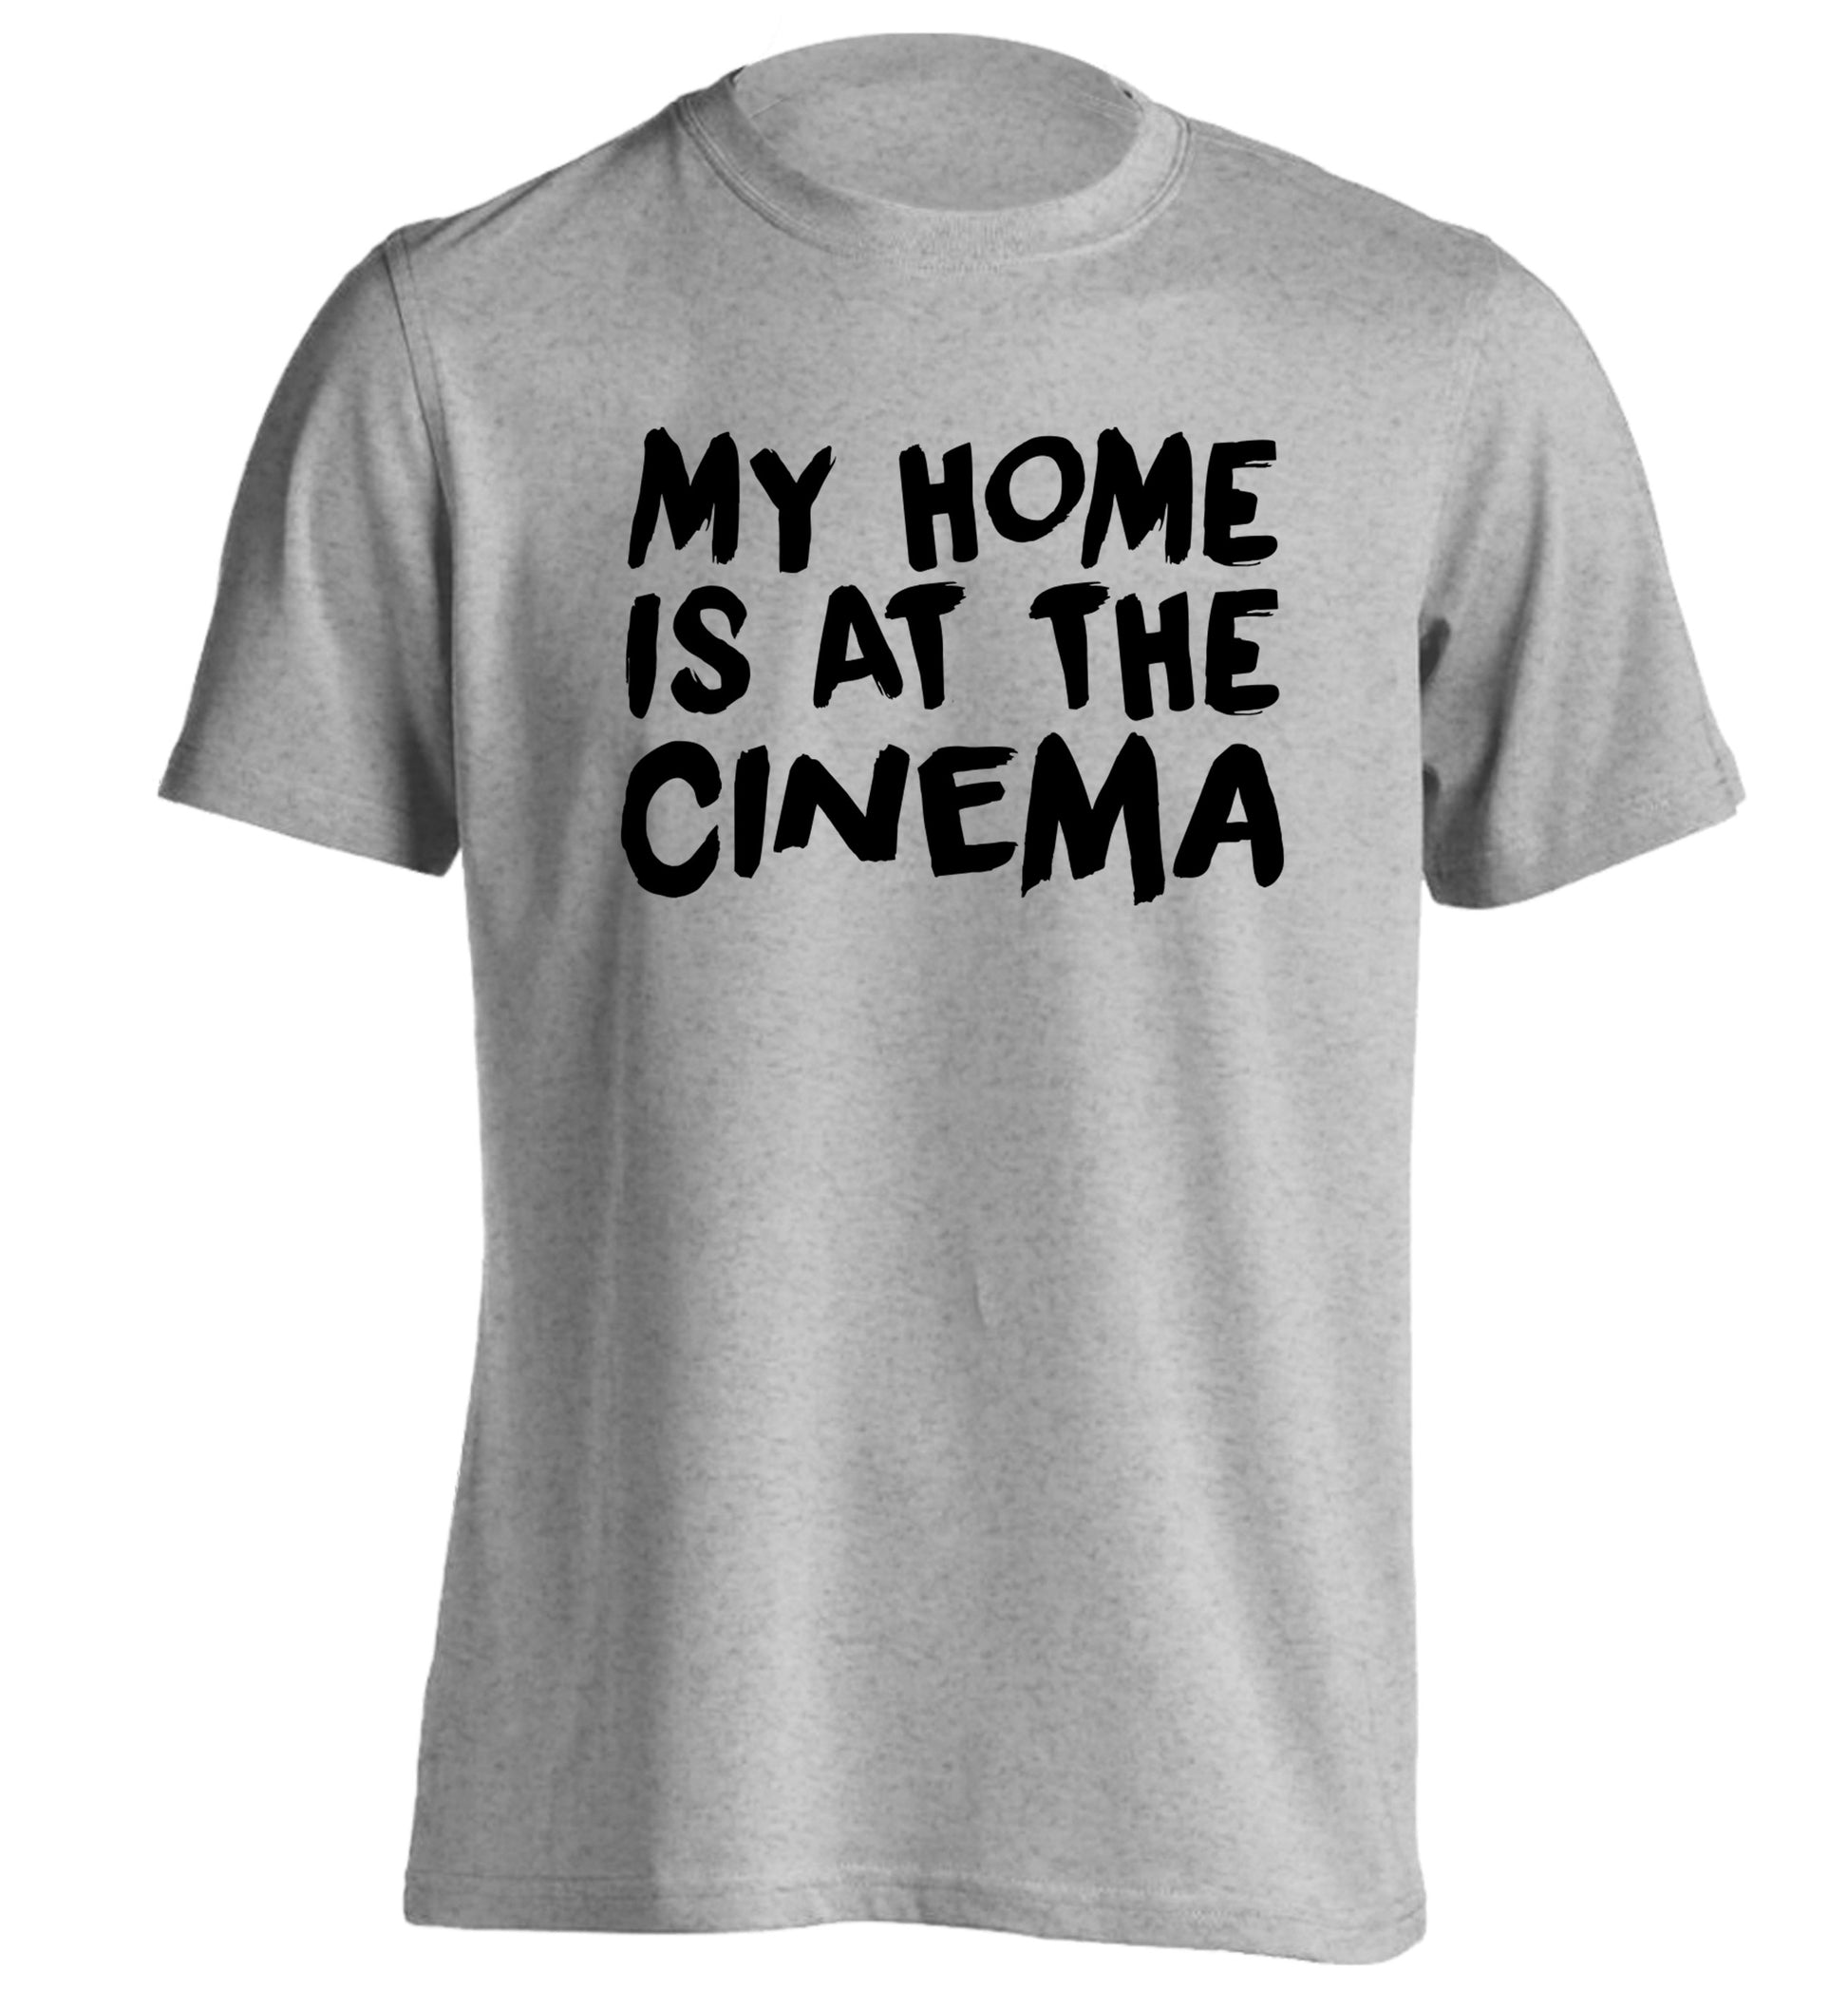 My home is at the cinema adults unisex grey Tshirt 2XL